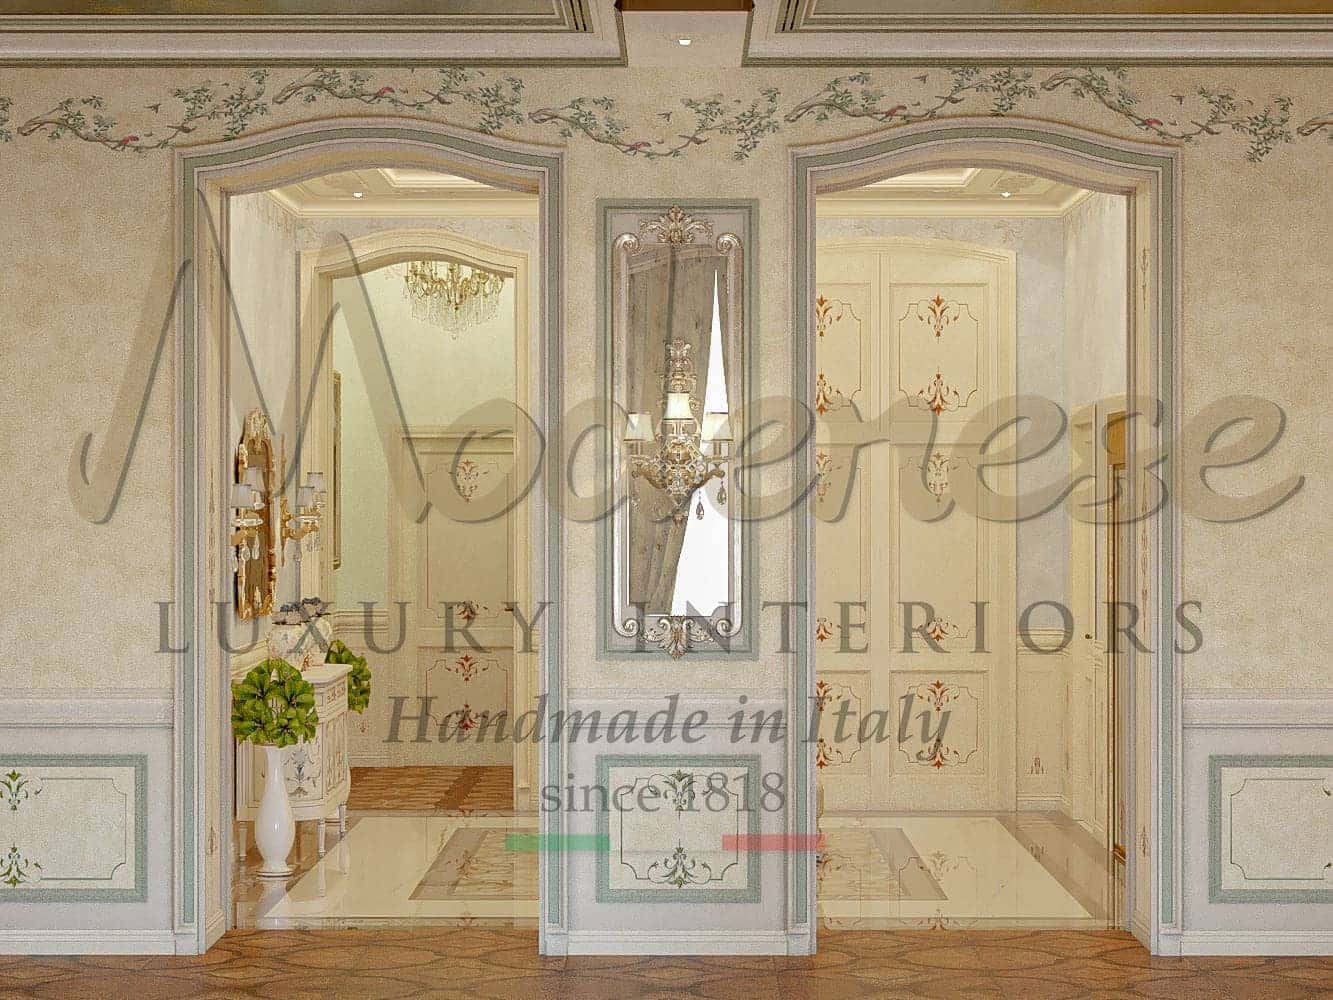 Refined handmade walls and ceilings decorations all perfectly matched with your classic furniture selection. Royal mansions beautiful paintings by expert Italian designers for the best international projects. High-end quality, made in Italy bespoke design, premium standards. Traditional handcrafted furniture and best baroque style rococo' interior design projects.